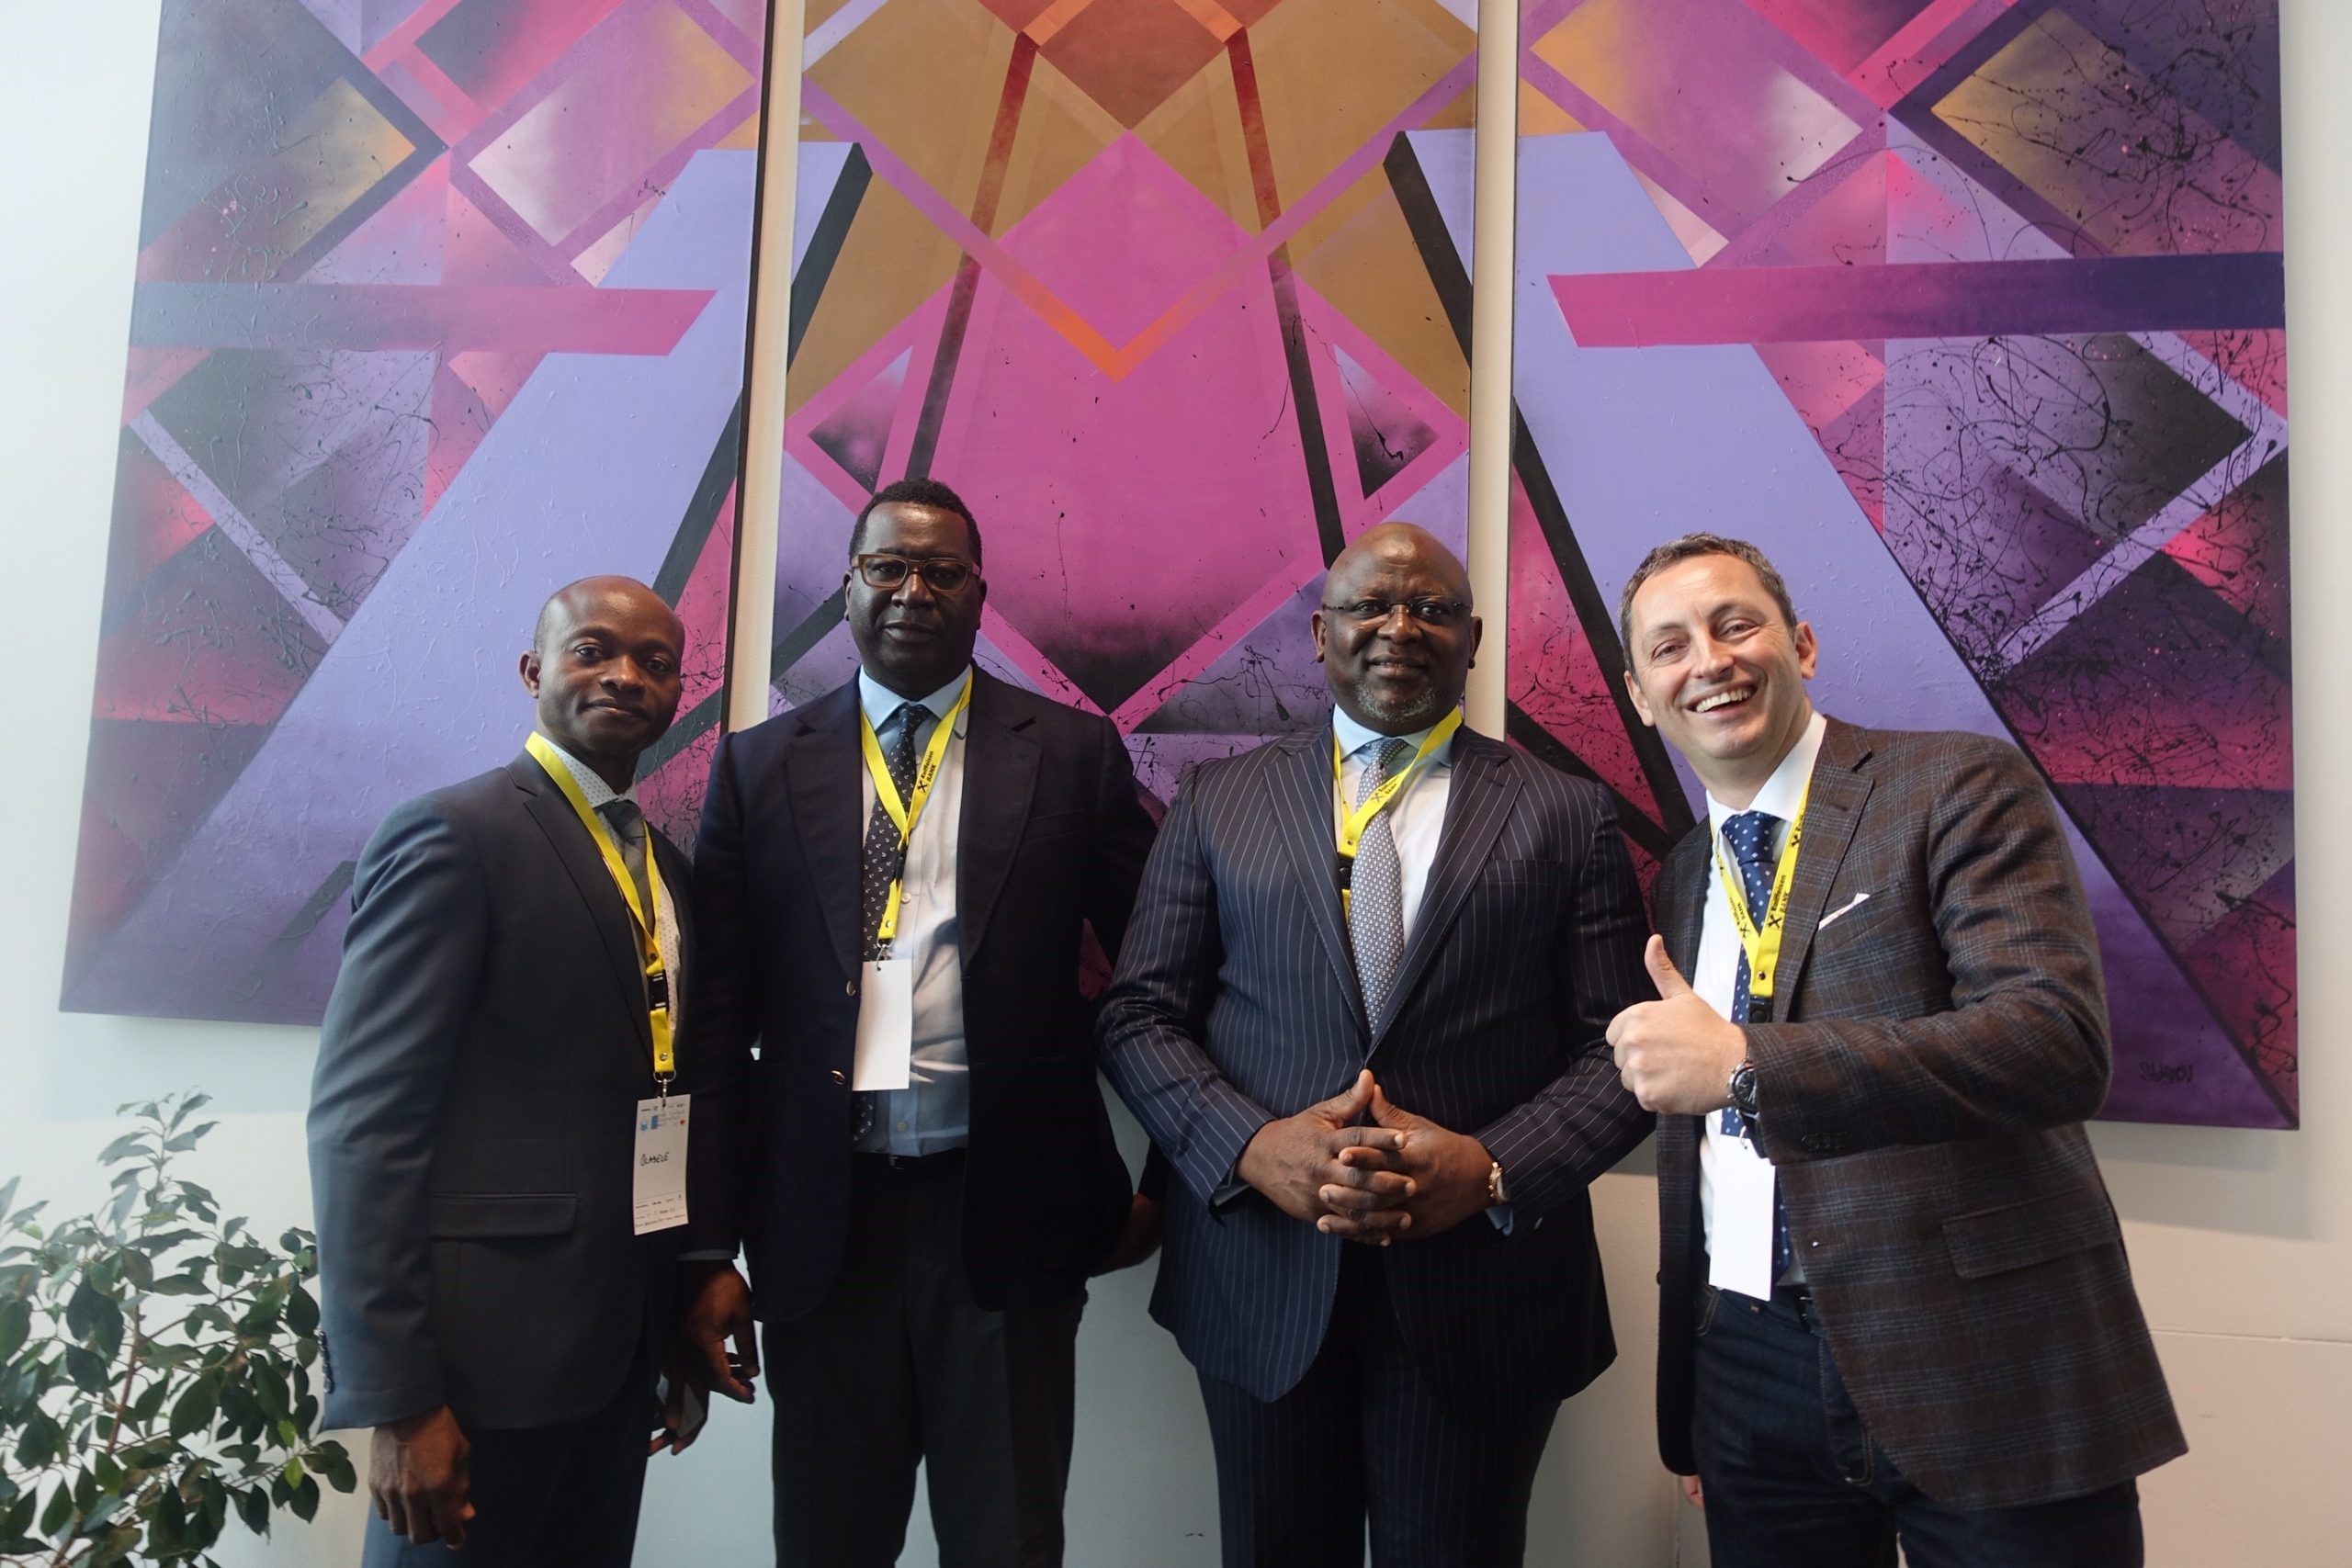 L-R: Mr. Tunde Oladele, CEO, Software Group; Mr. Olayinka Situ, Group Head, Corporate Transformation, FirstBank; Dr. Adesola Adeduntan, CEO, FirstBank and Filip Genov, Co-Founder & CEO, F27 at the Annual FinTech & InsureTech Summit held at Sofia Event Center, Bulgaria.